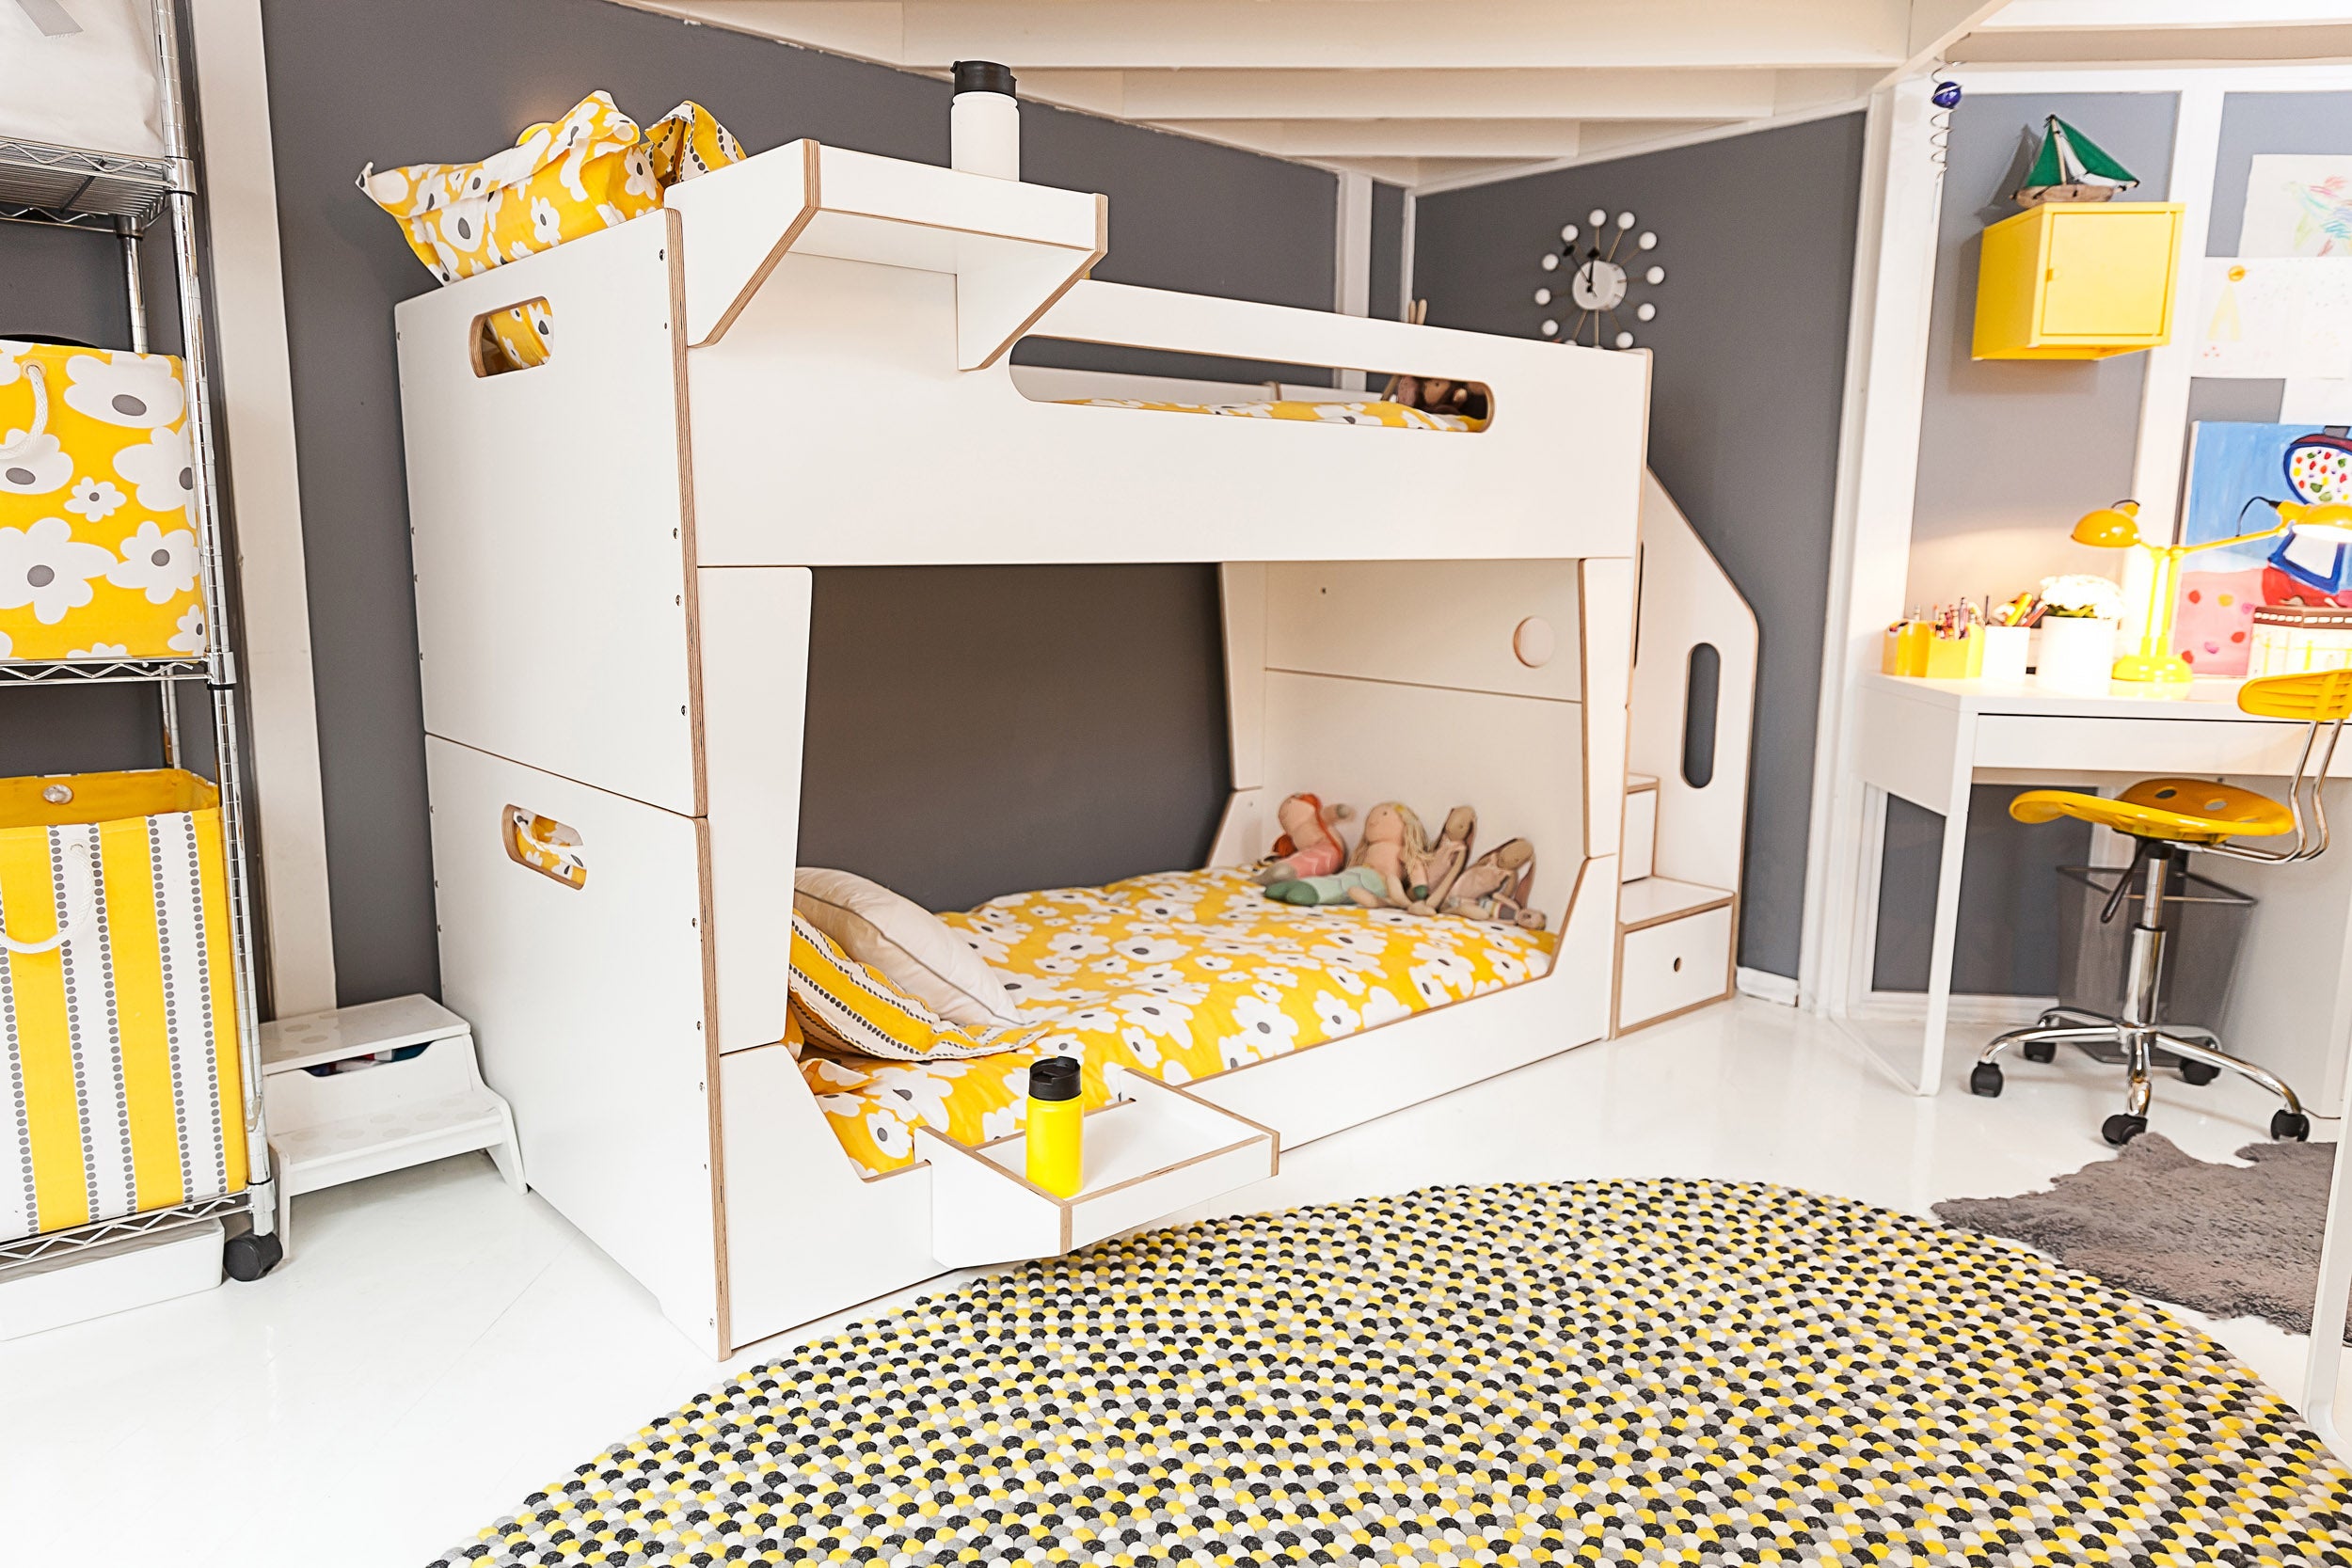 Colorful children's room featuring a white bunk bed with playful yellow accents and vibrant decor.